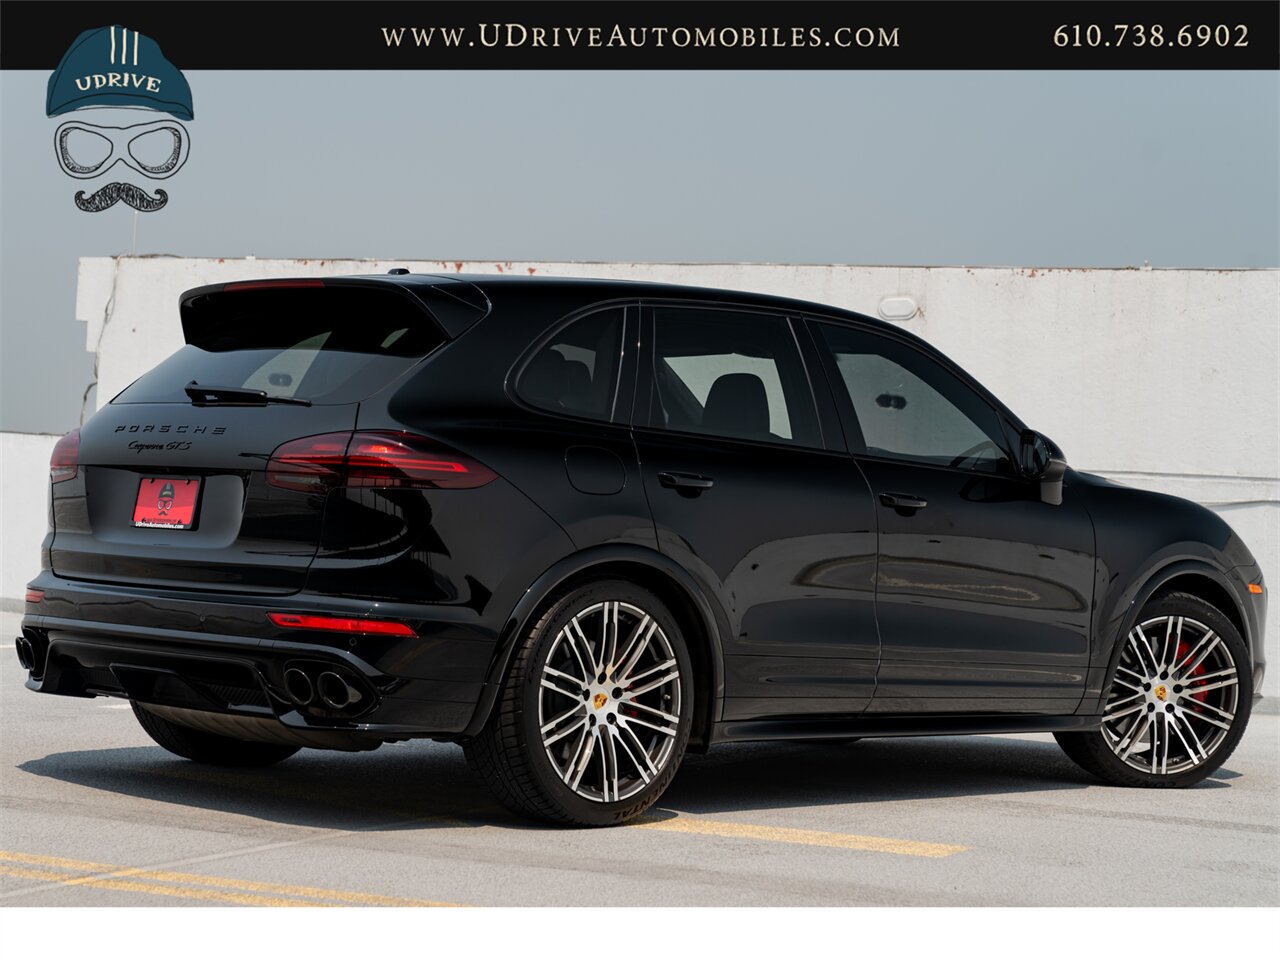 2016 Porsche Cayenne GTS  CPO Warranty 21in Whls Sport Chrono Red Dial Alcantara Red Belts Pano - Photo 3 - West Chester, PA 19382